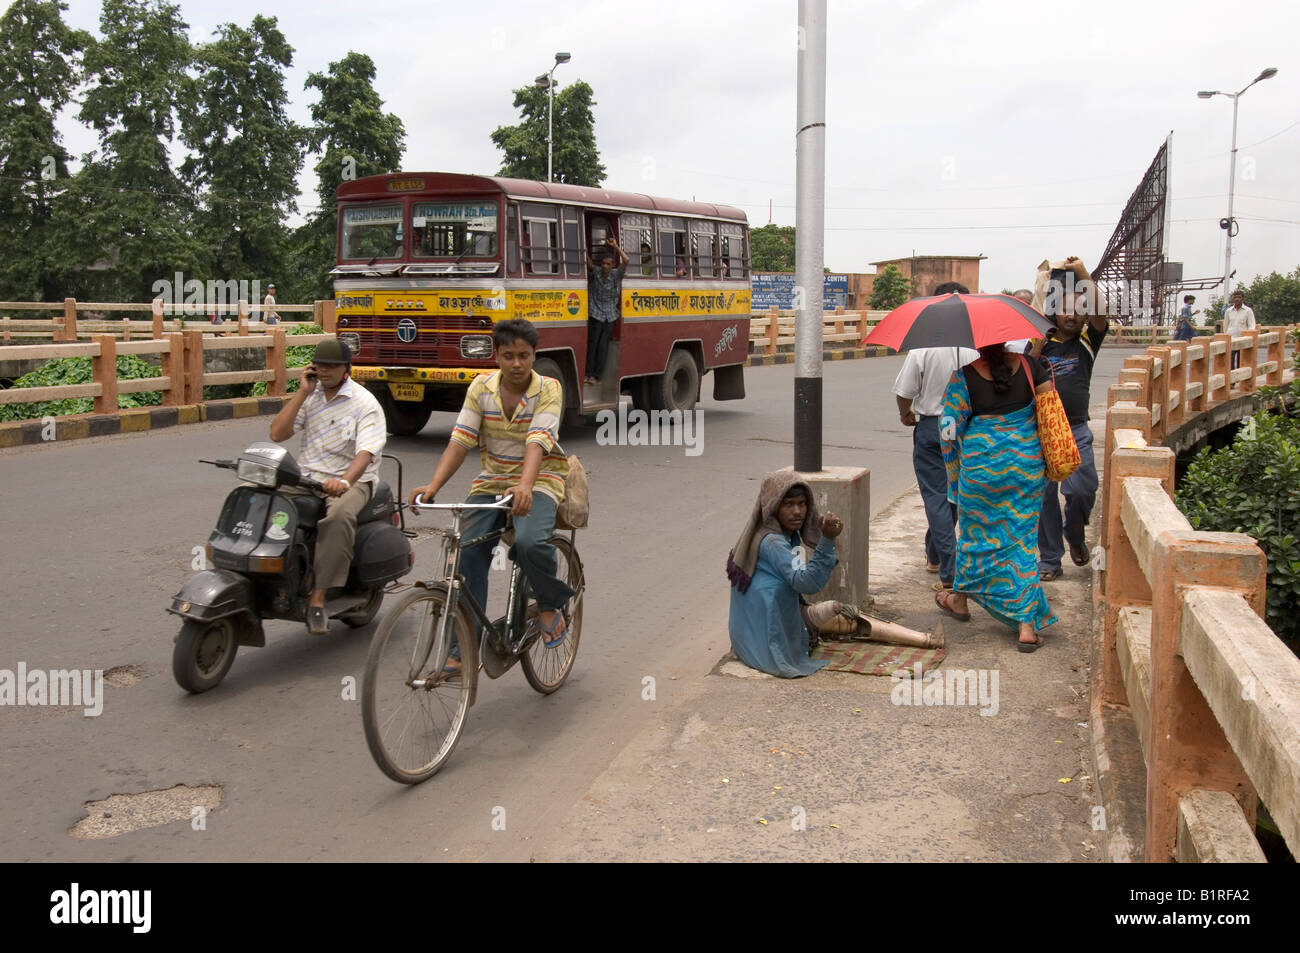 Street scene in Howrah illustrating the paradoxes within modern Indian society, crippled beggar next to the new middle class, H Stock Photo